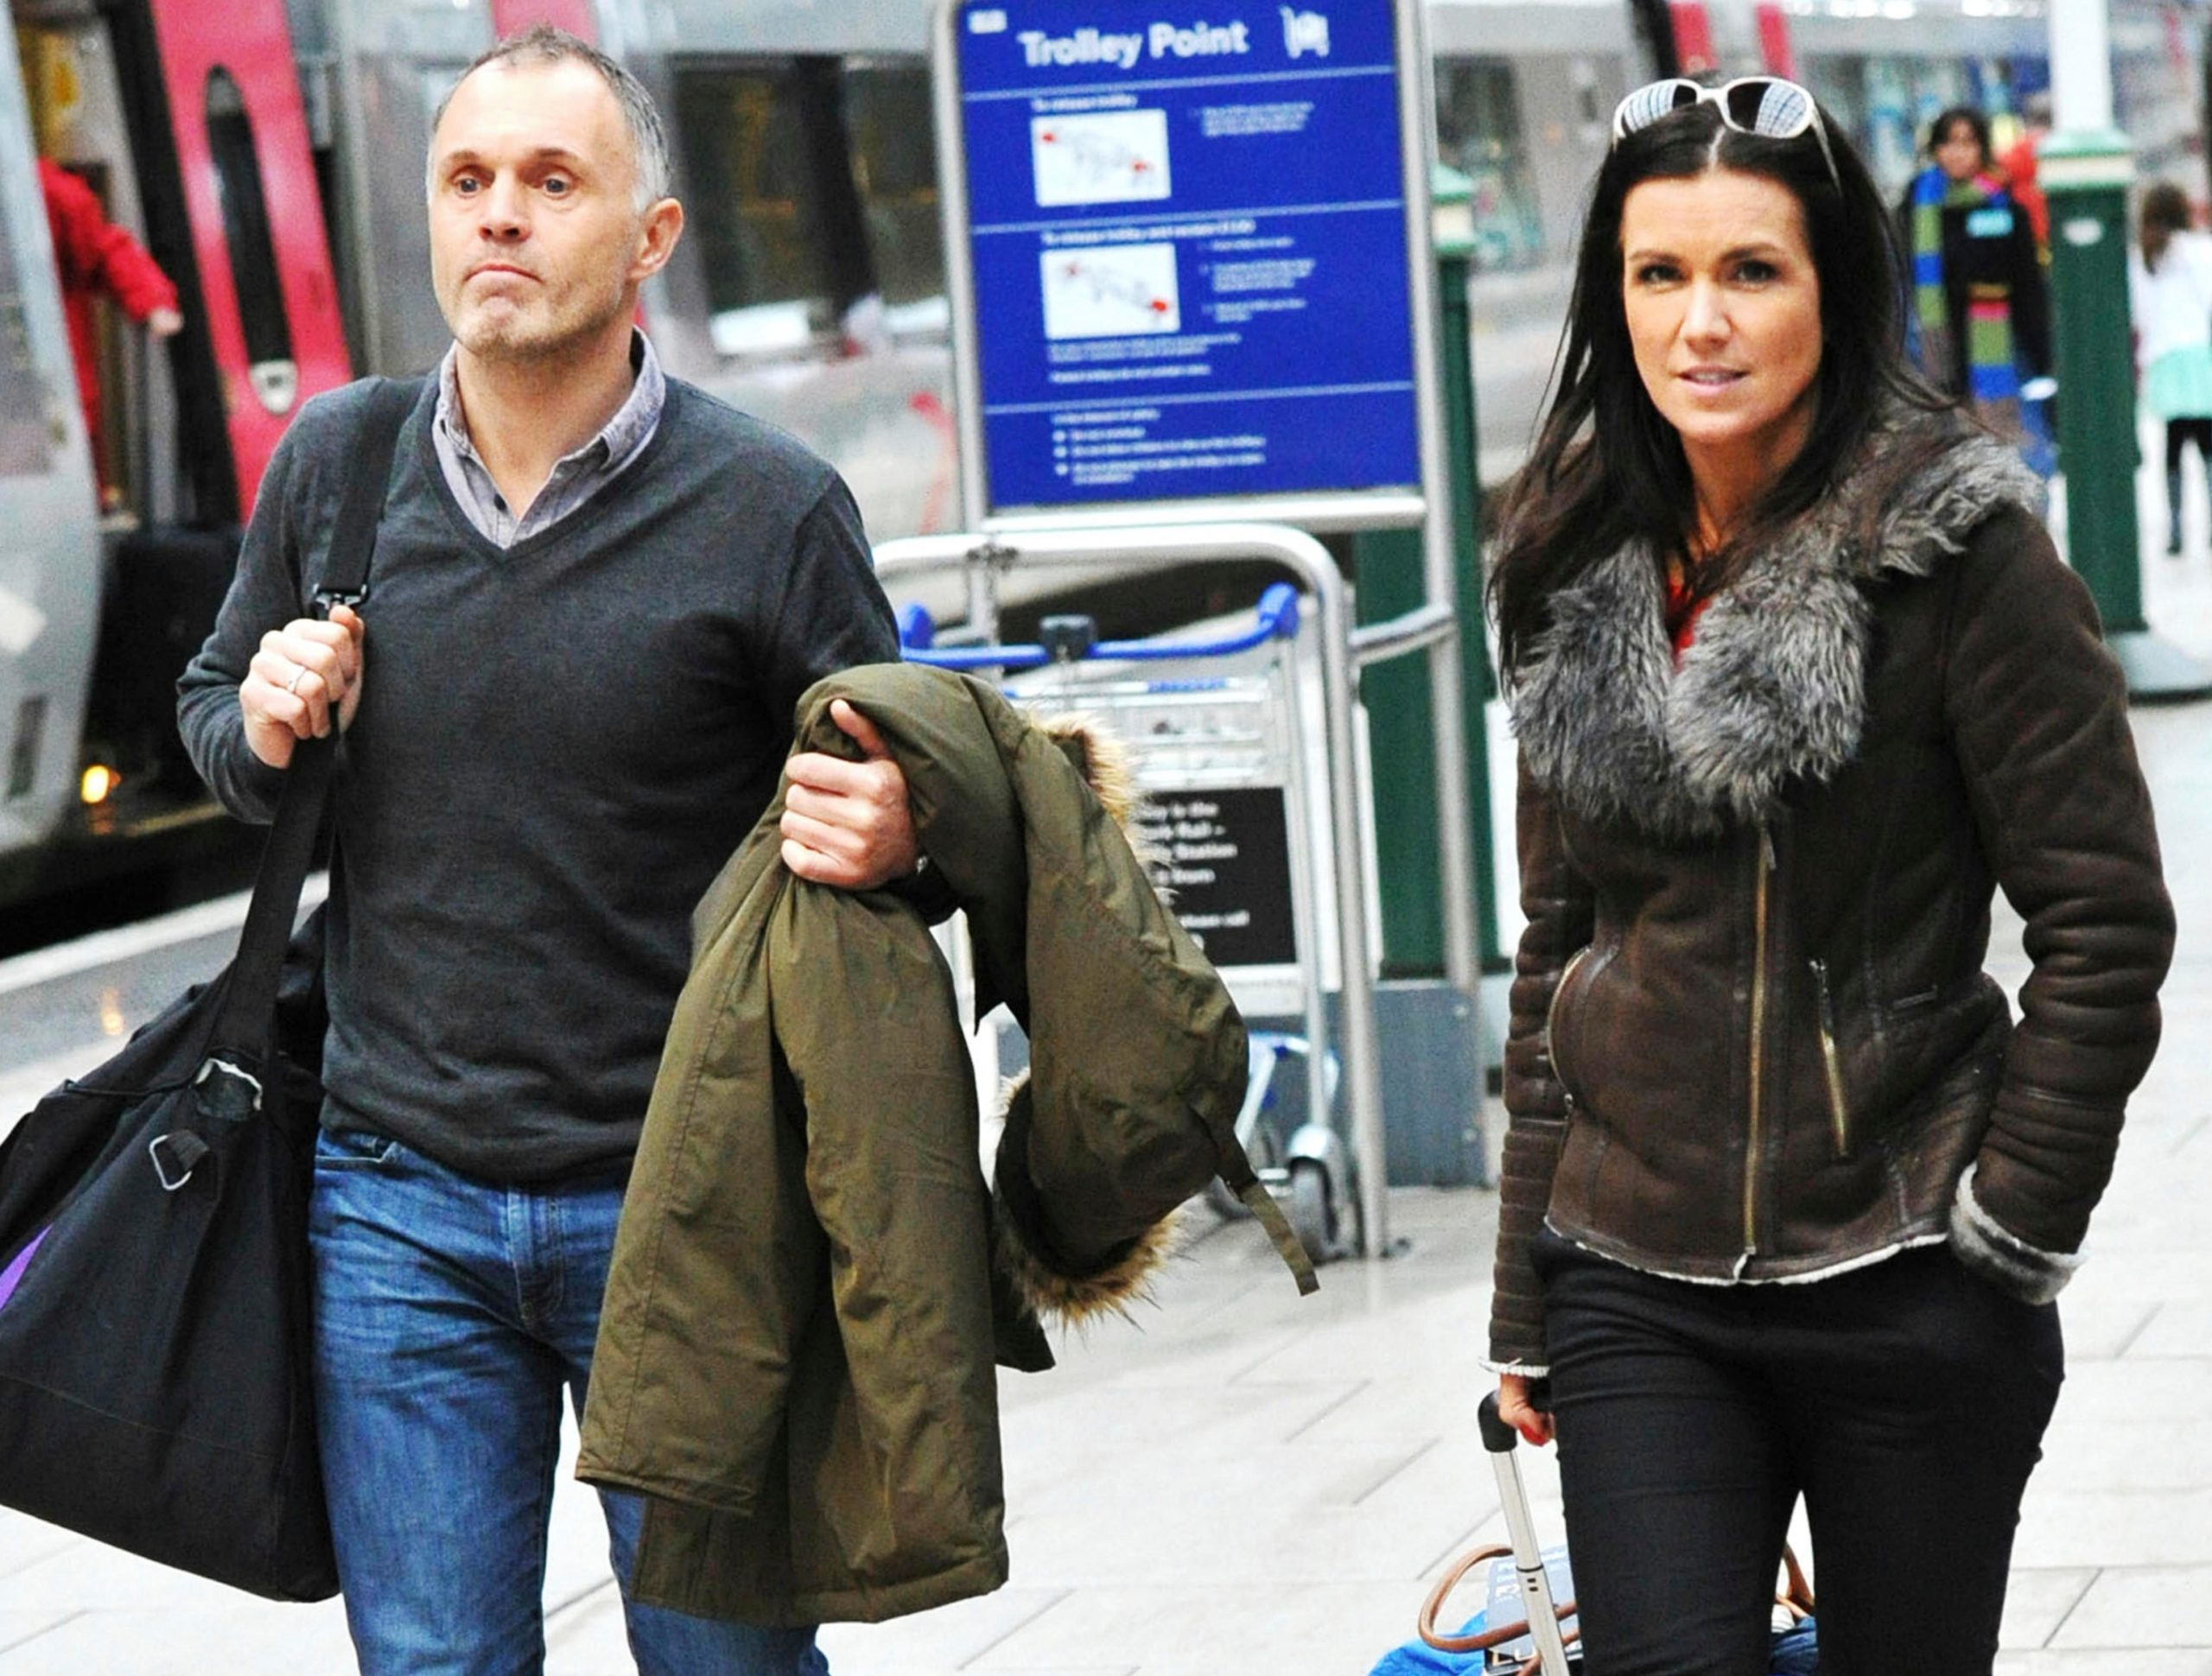 Susanna Reid was previously married to sports commentator Dominic Cotton